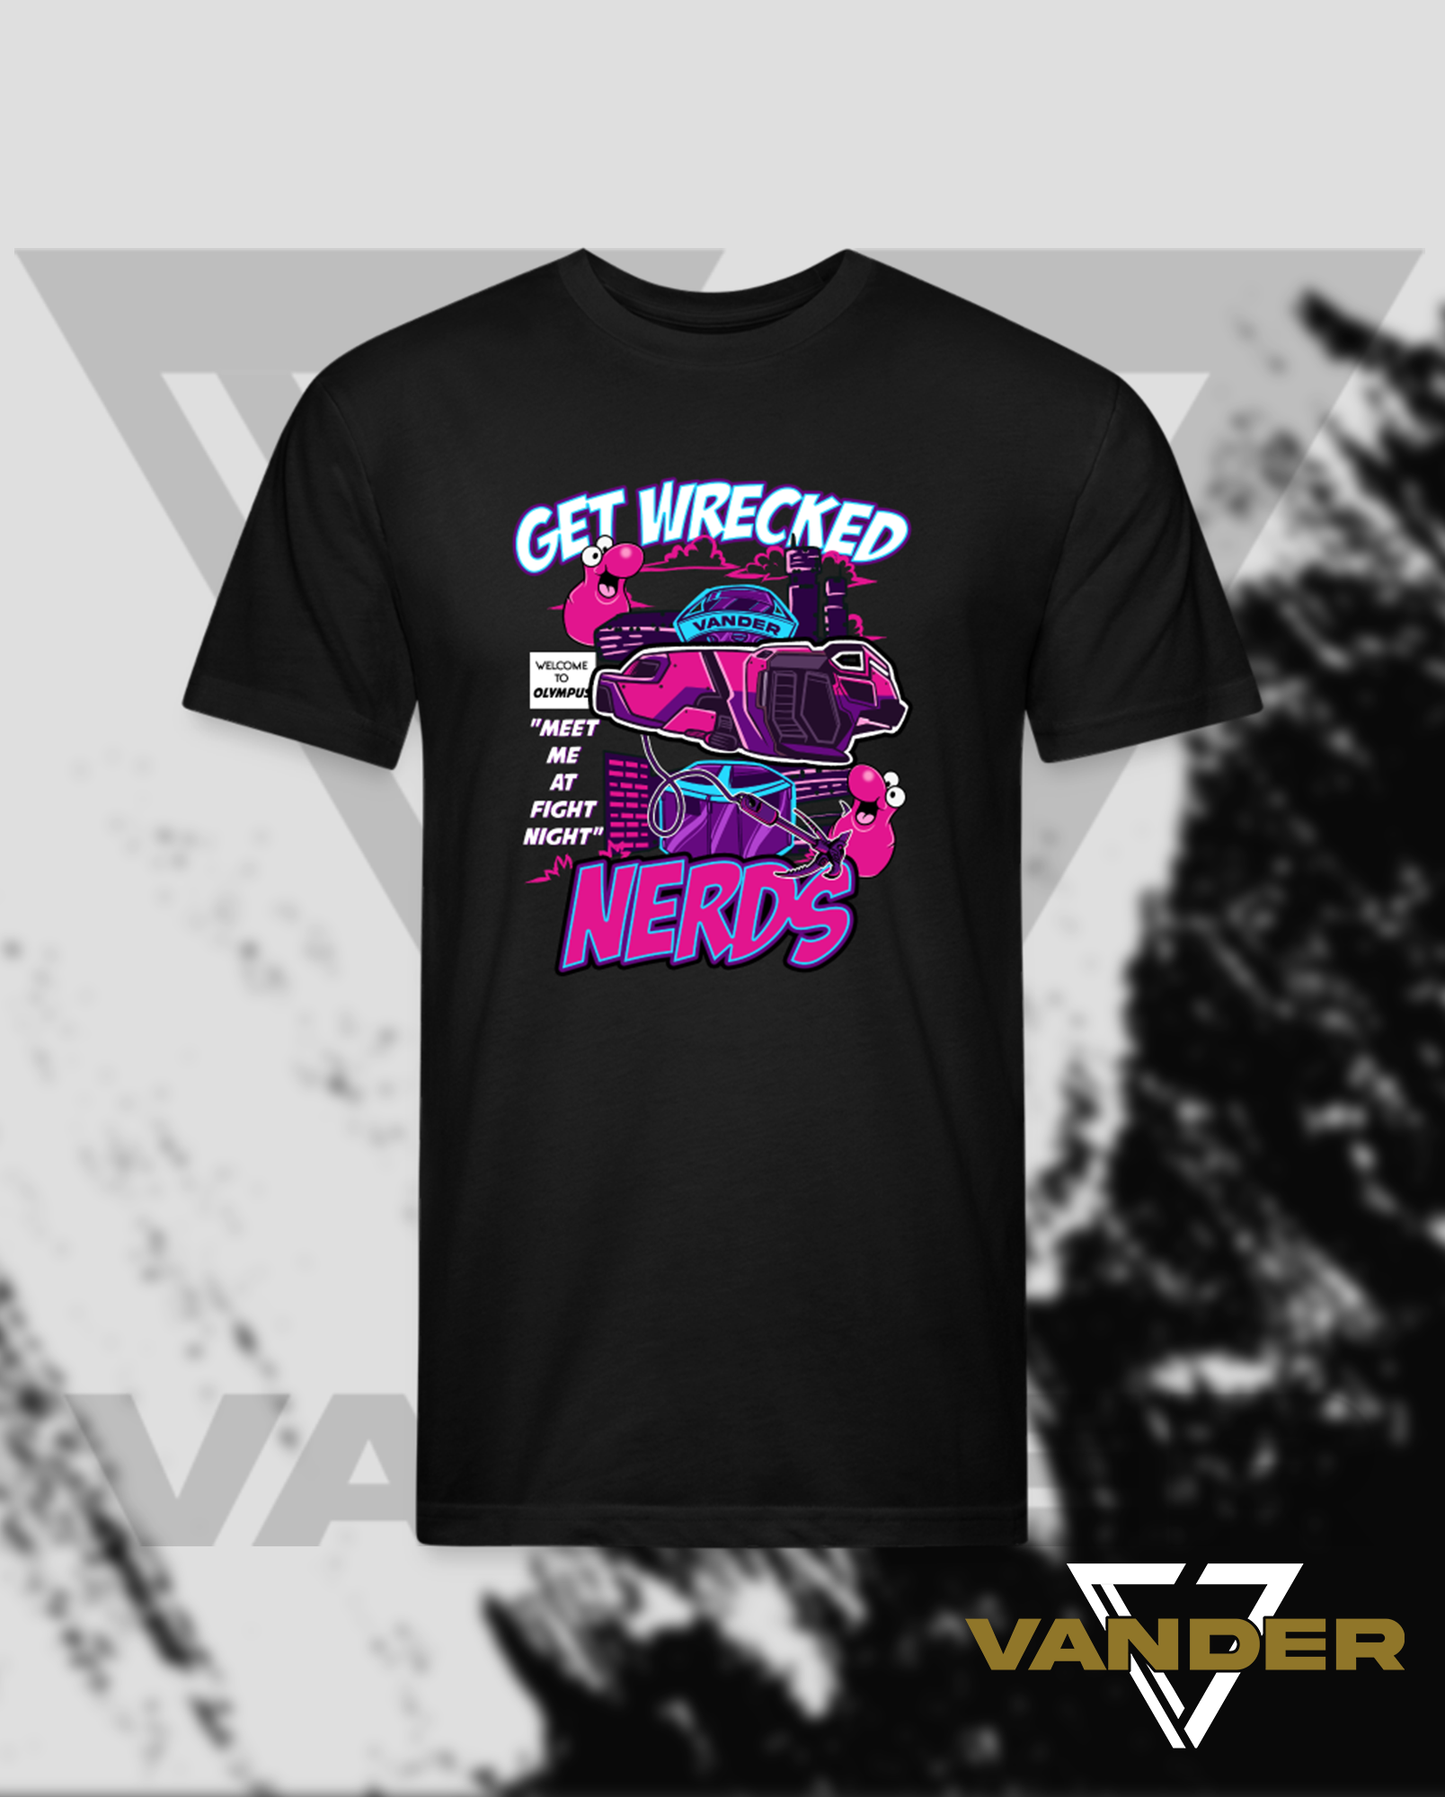 Adult Vander ‘Get Wrecked Nerds’ Graphic Fitted T-Shirt